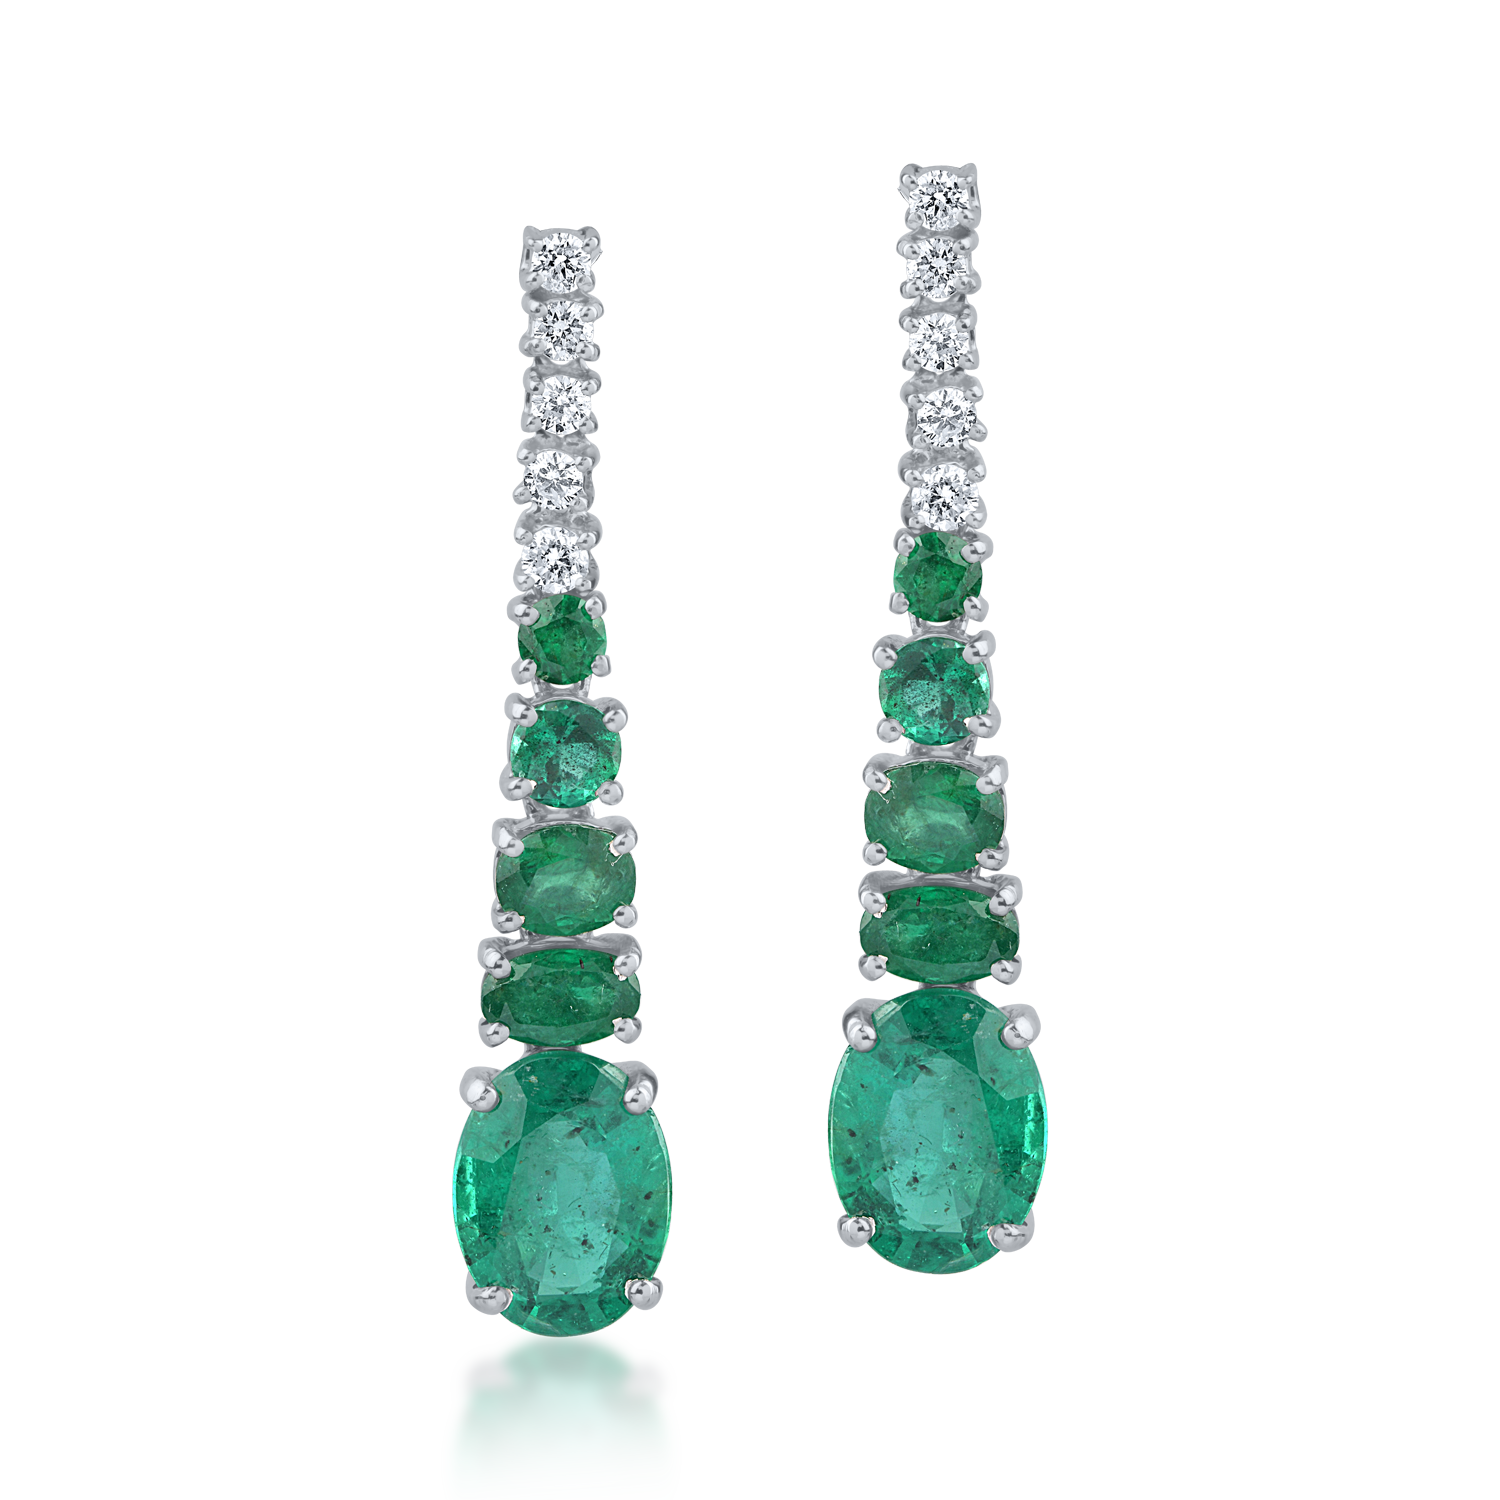 White gold earrings with 4.52ct emeralds and 0.27ct diamonds